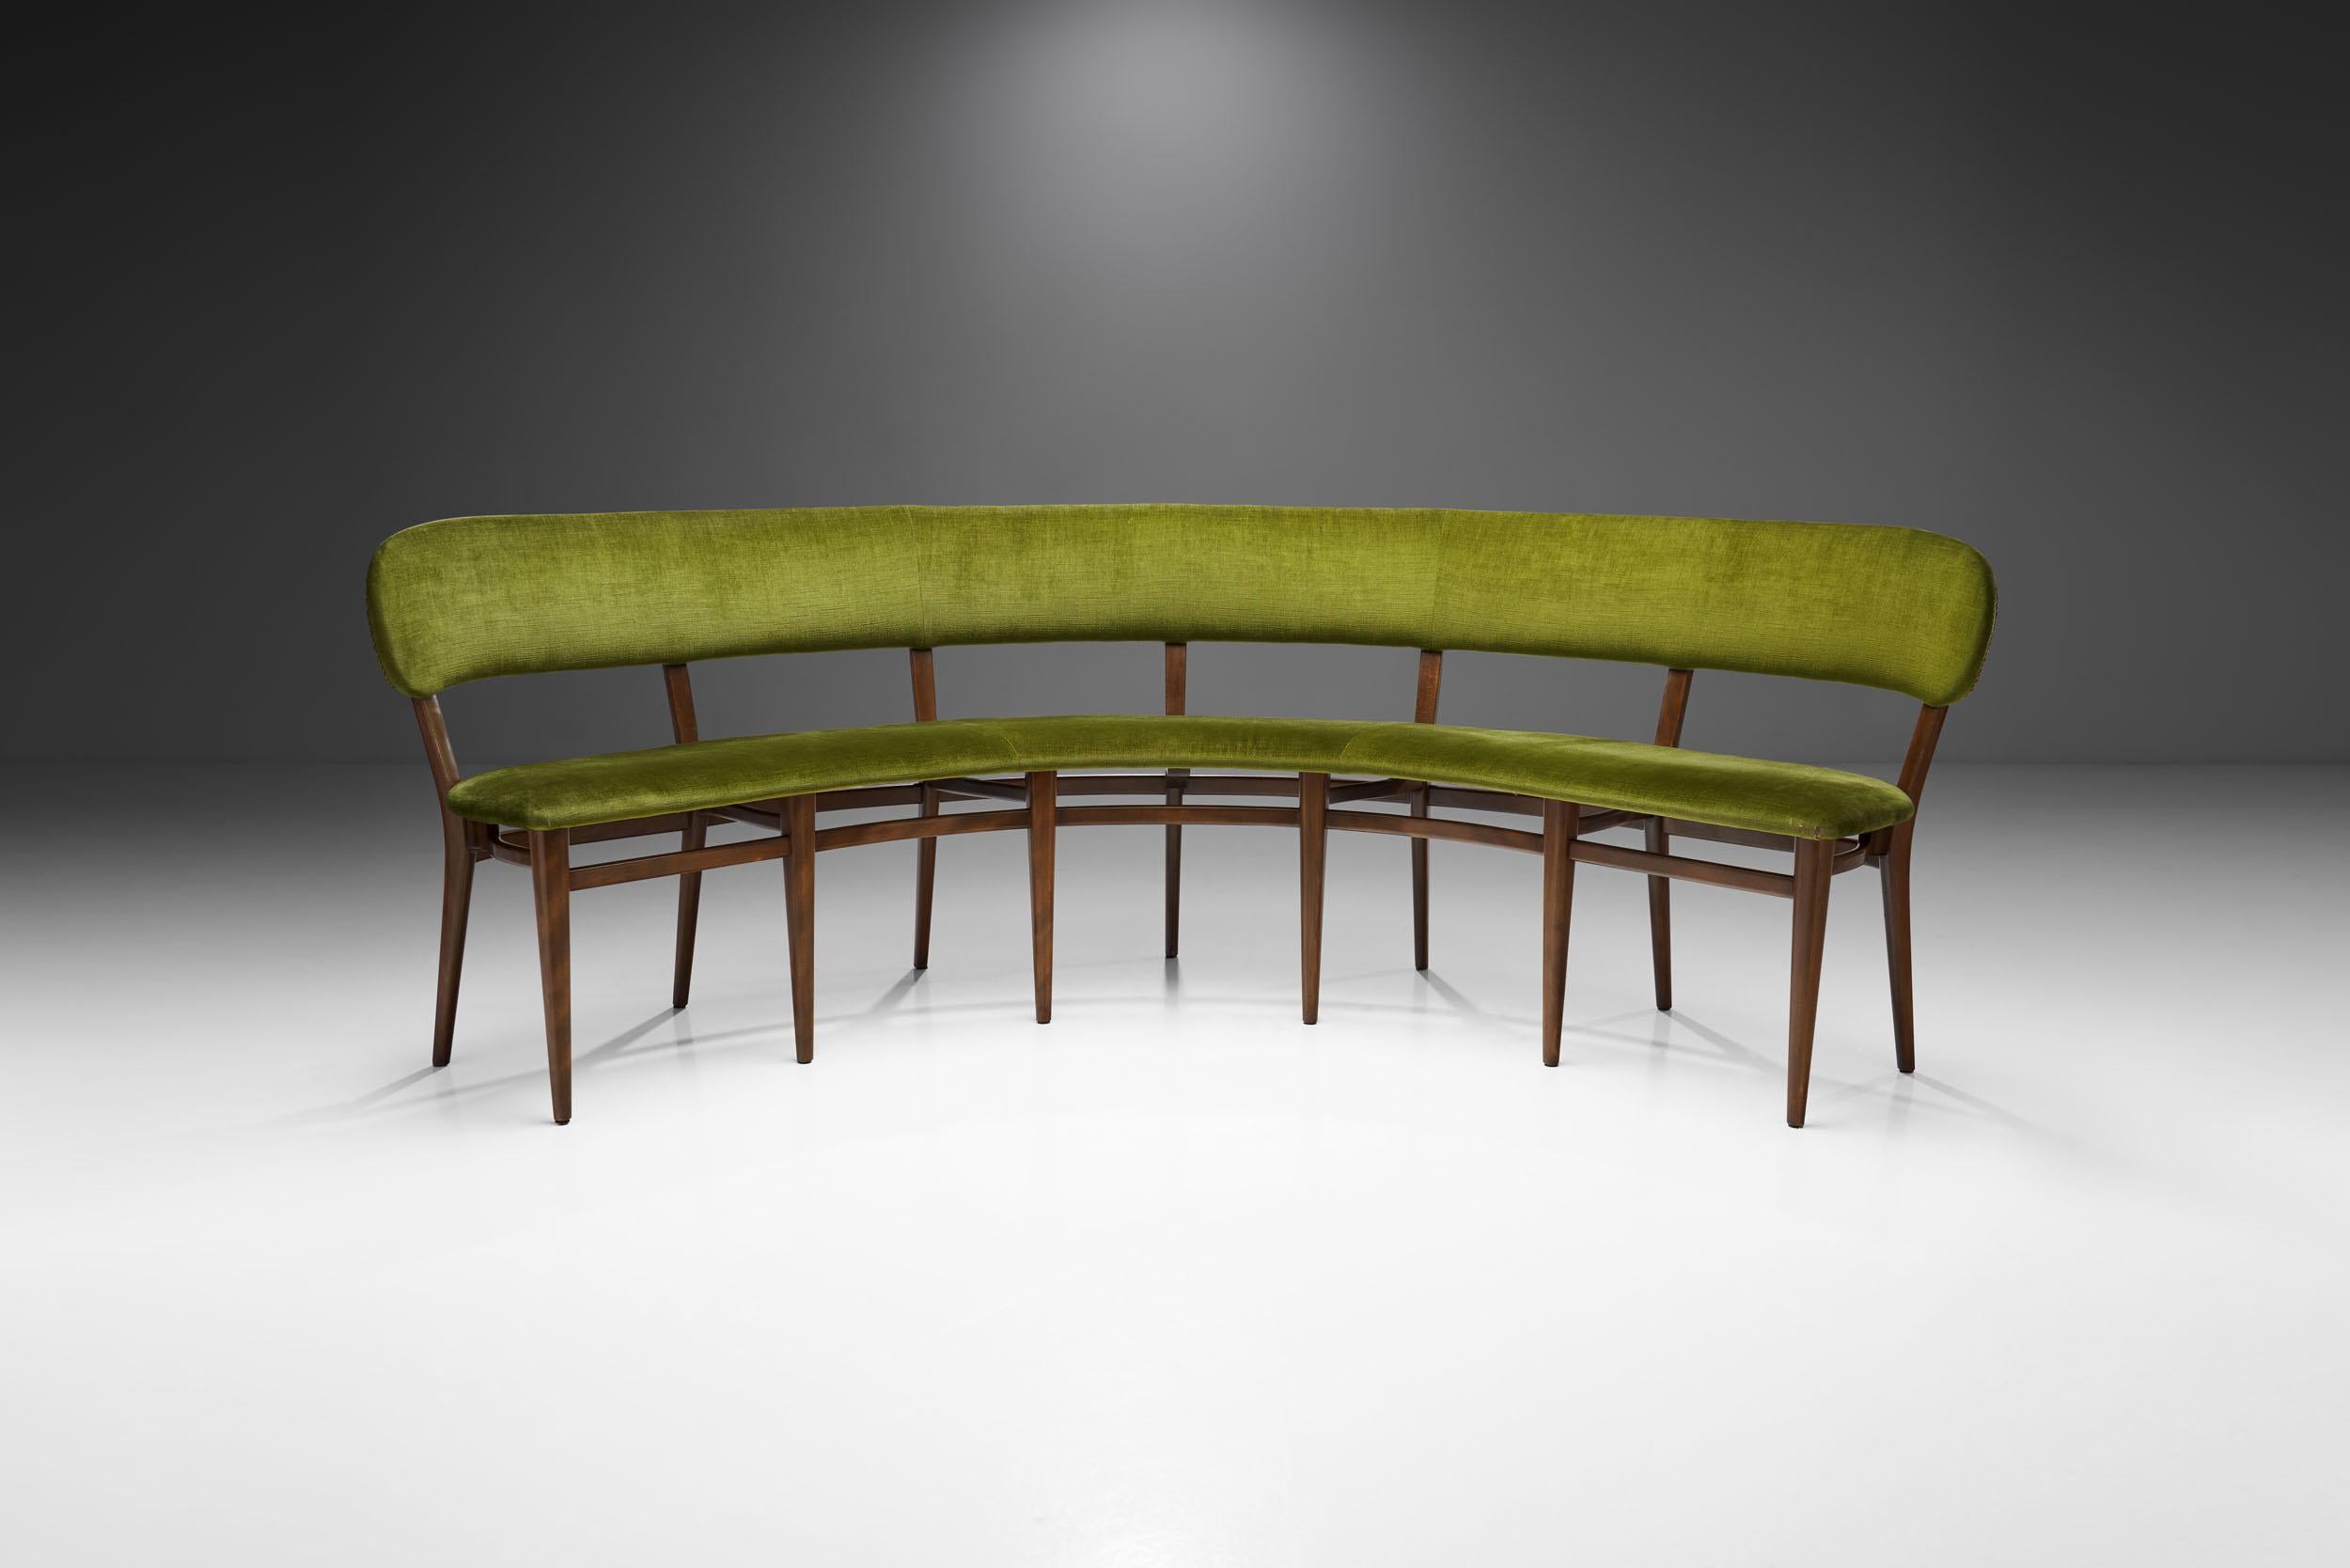 While there are several unique Danish designs from the mid-century, this bench redefines what counts as one-of-a-kind. This unusual model points to a master craftsman with an imaginative spirit, who did not back down from reimagining what a bench